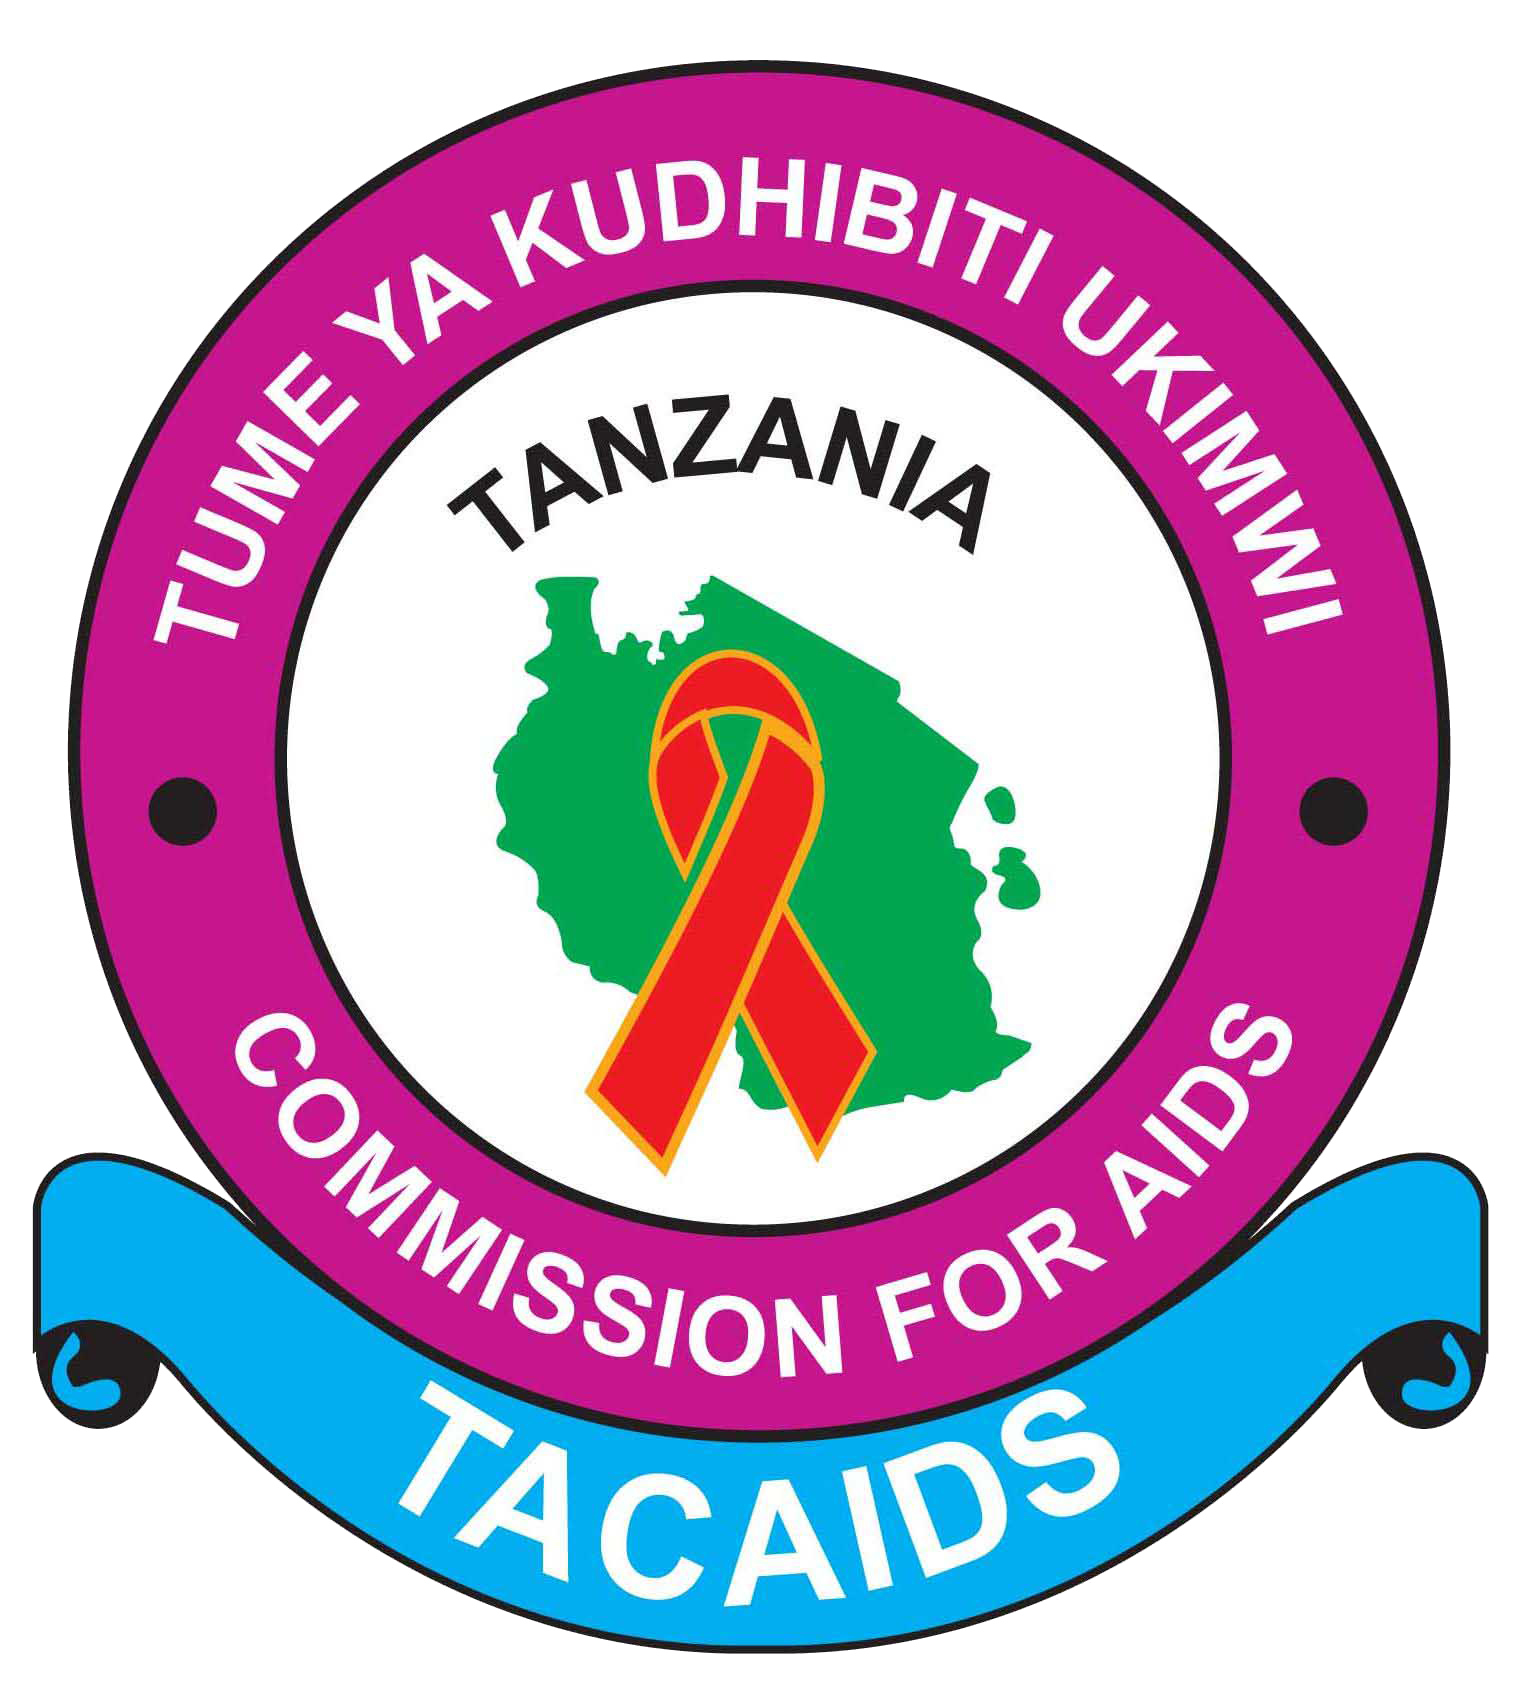 Tanzania Commission for AIDS